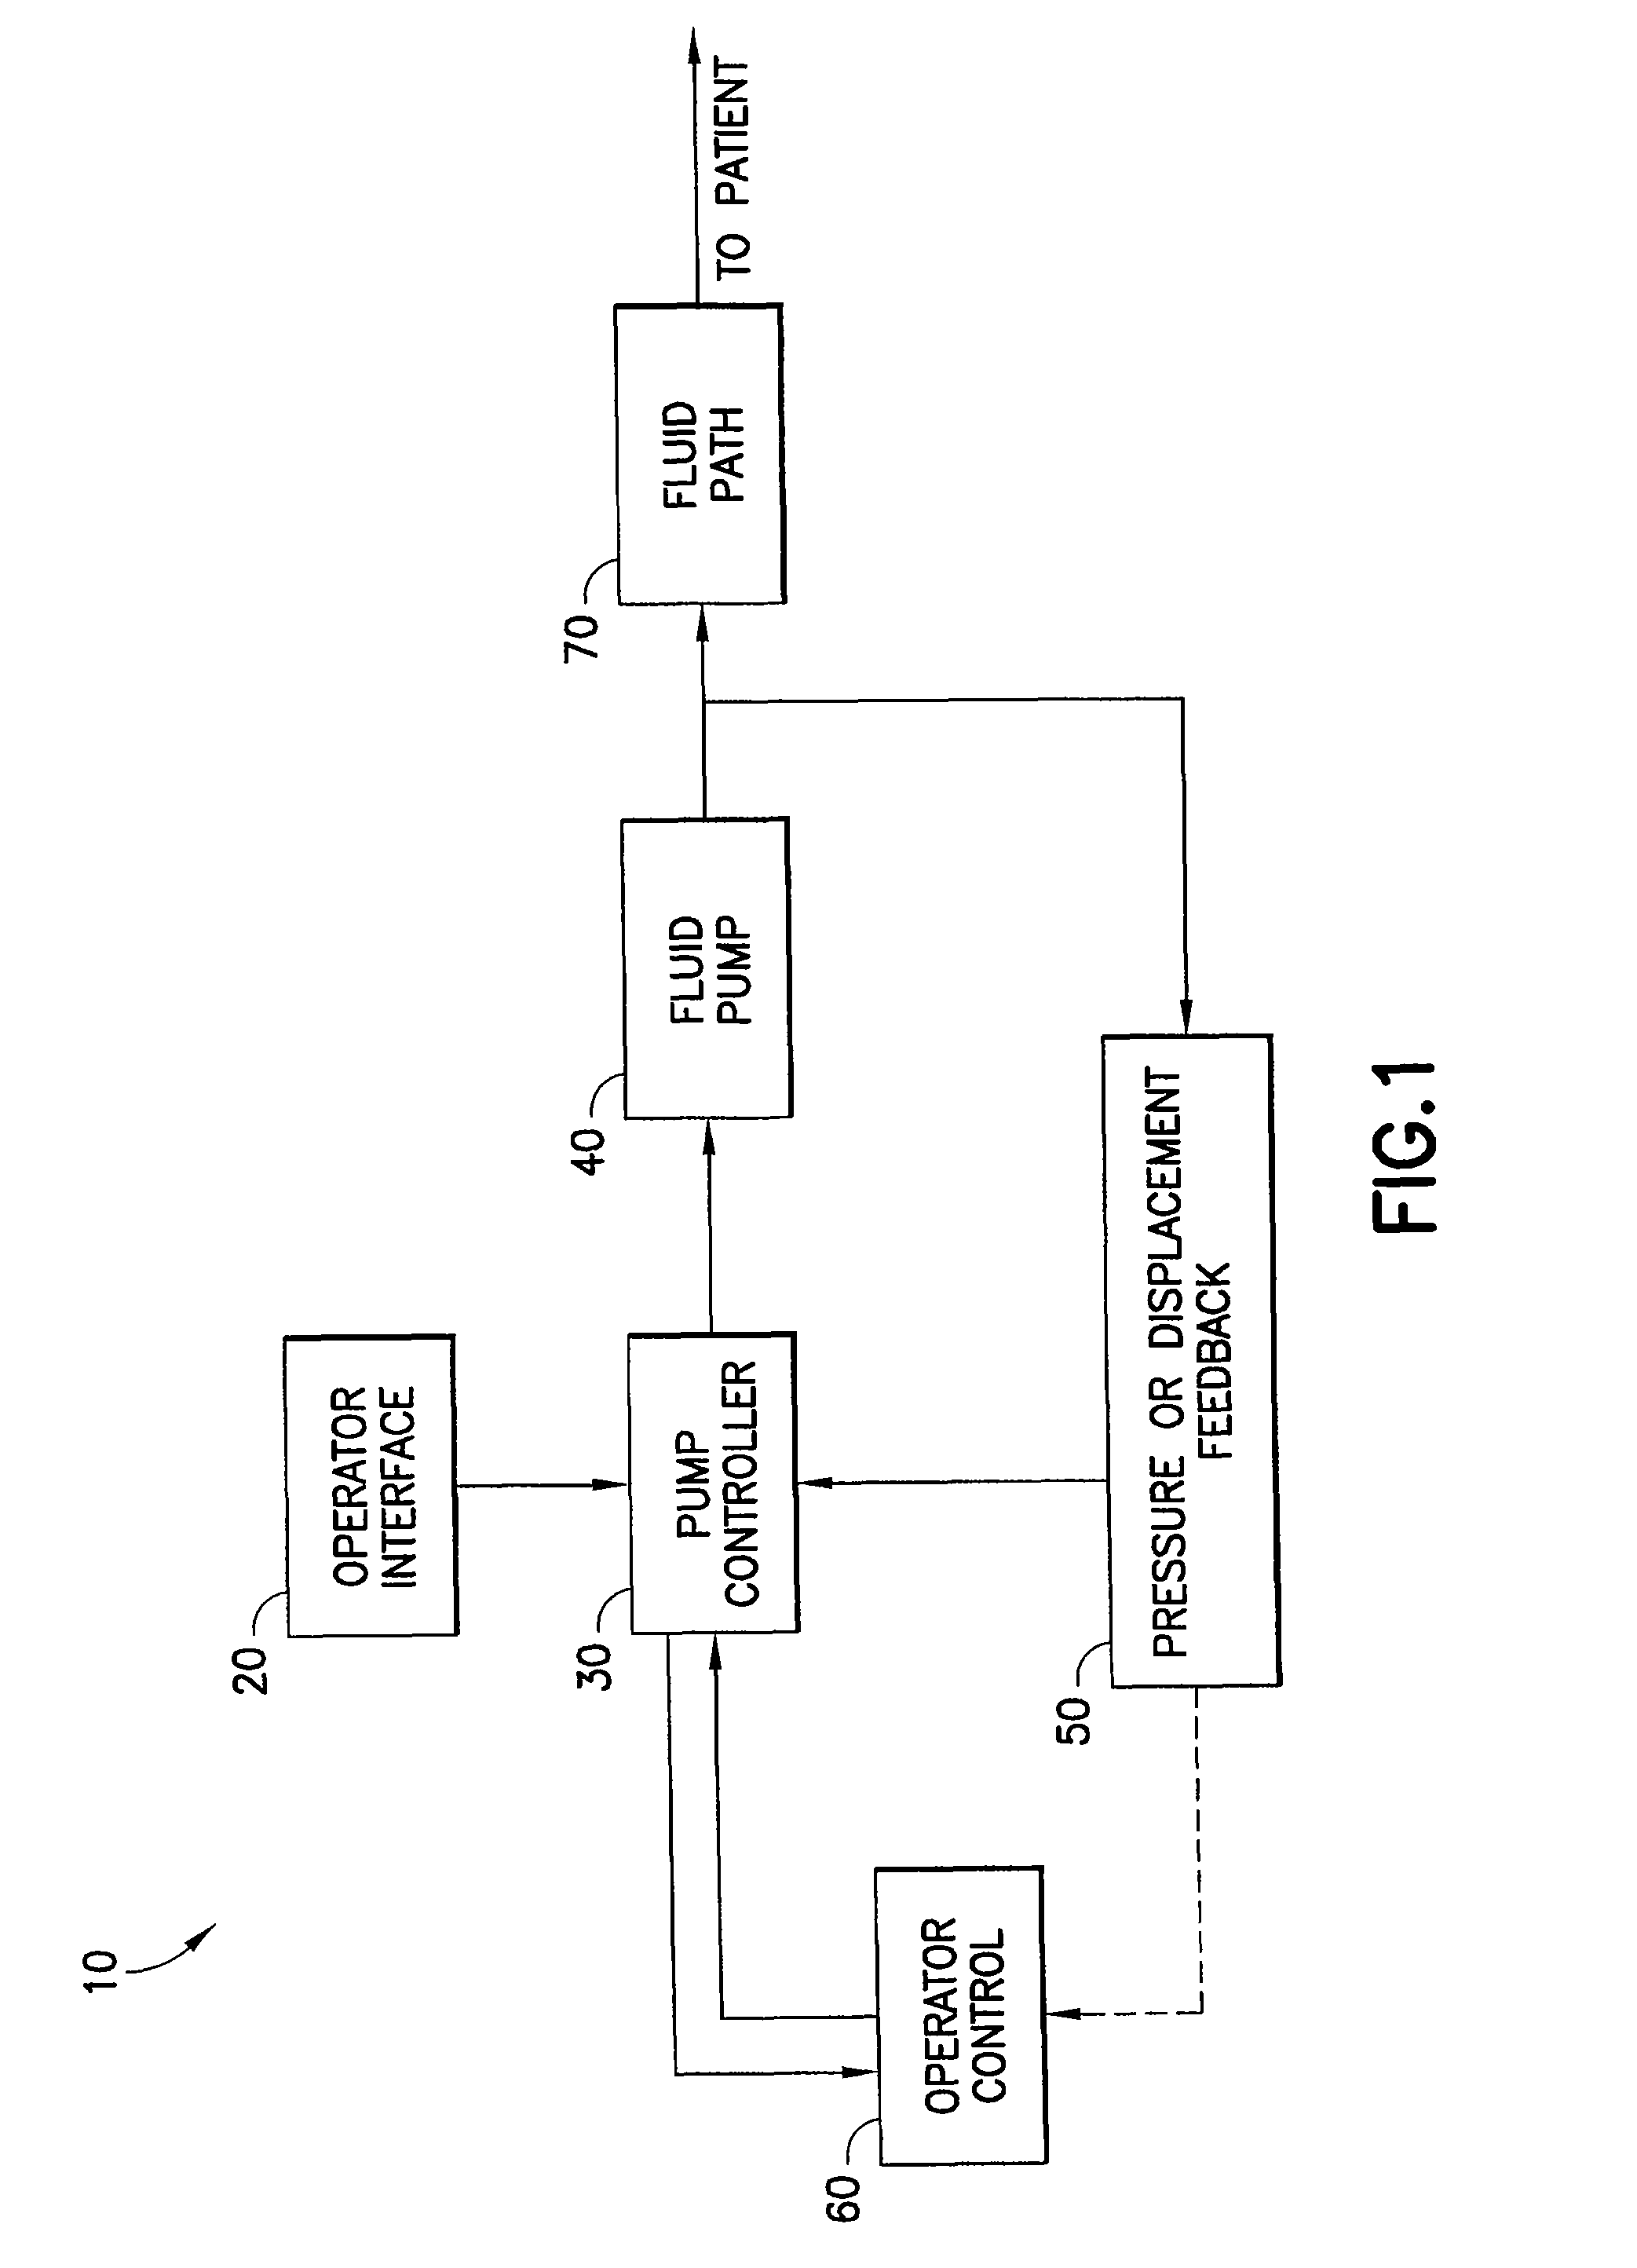 Medical fluid injection and inflation system